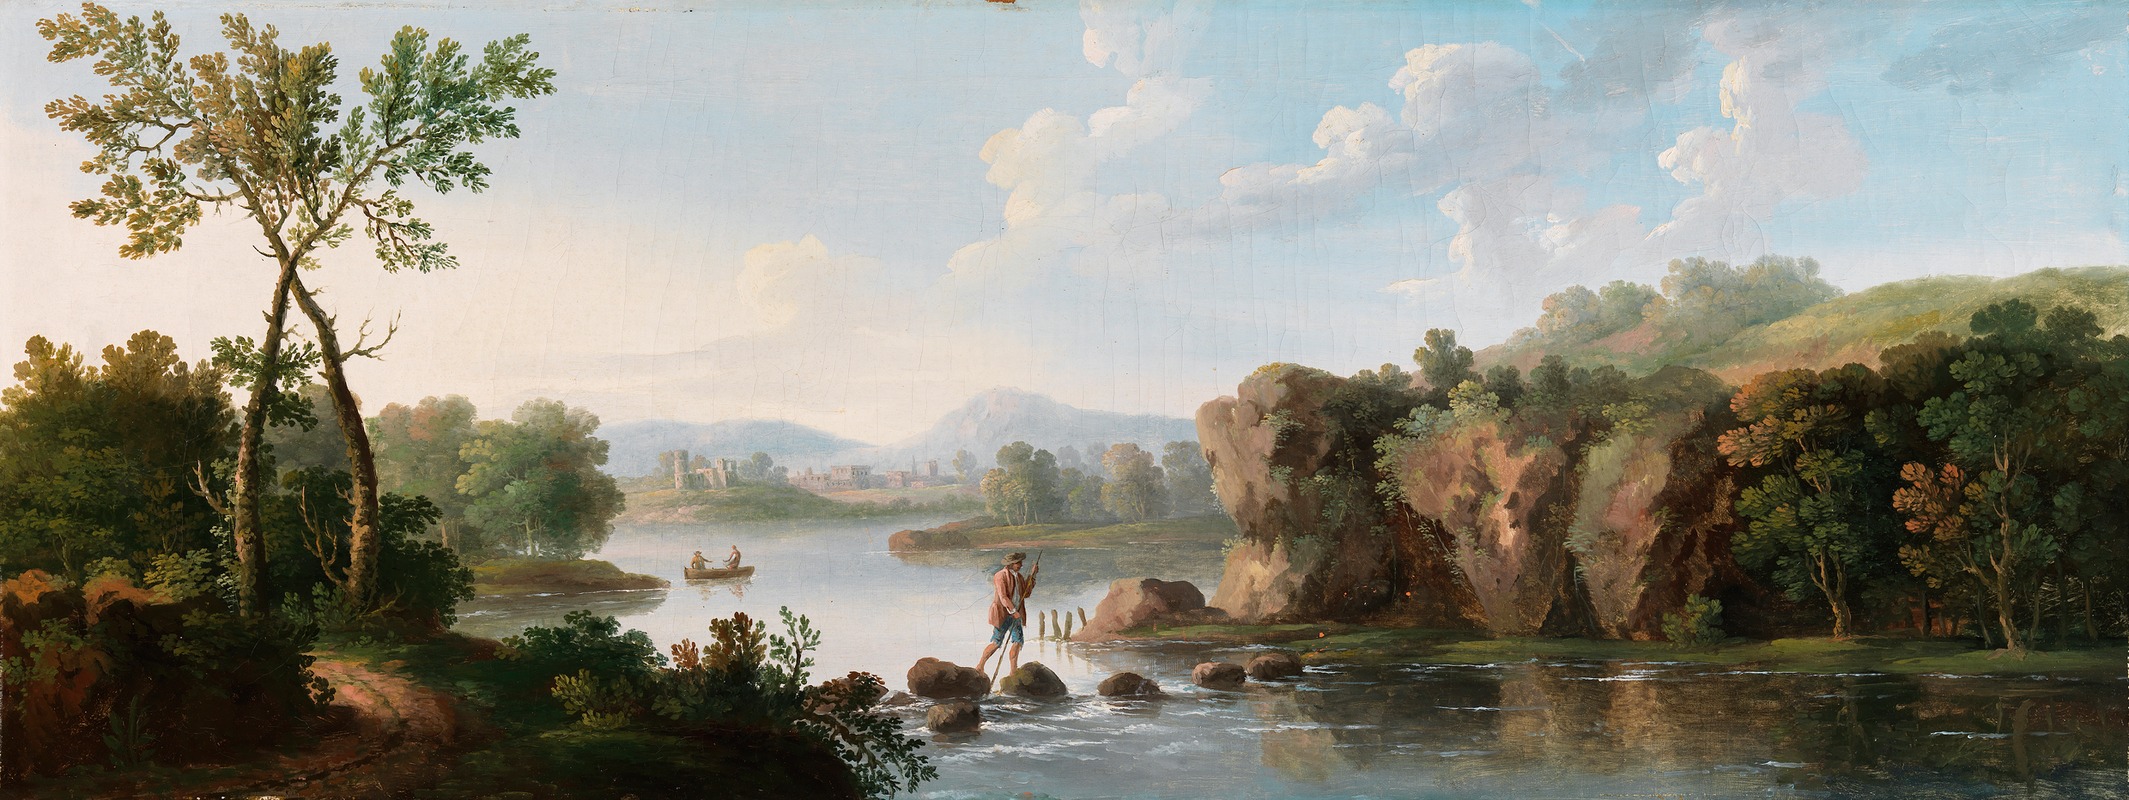 George Barret - A Landscape with a Man Fording a Stream